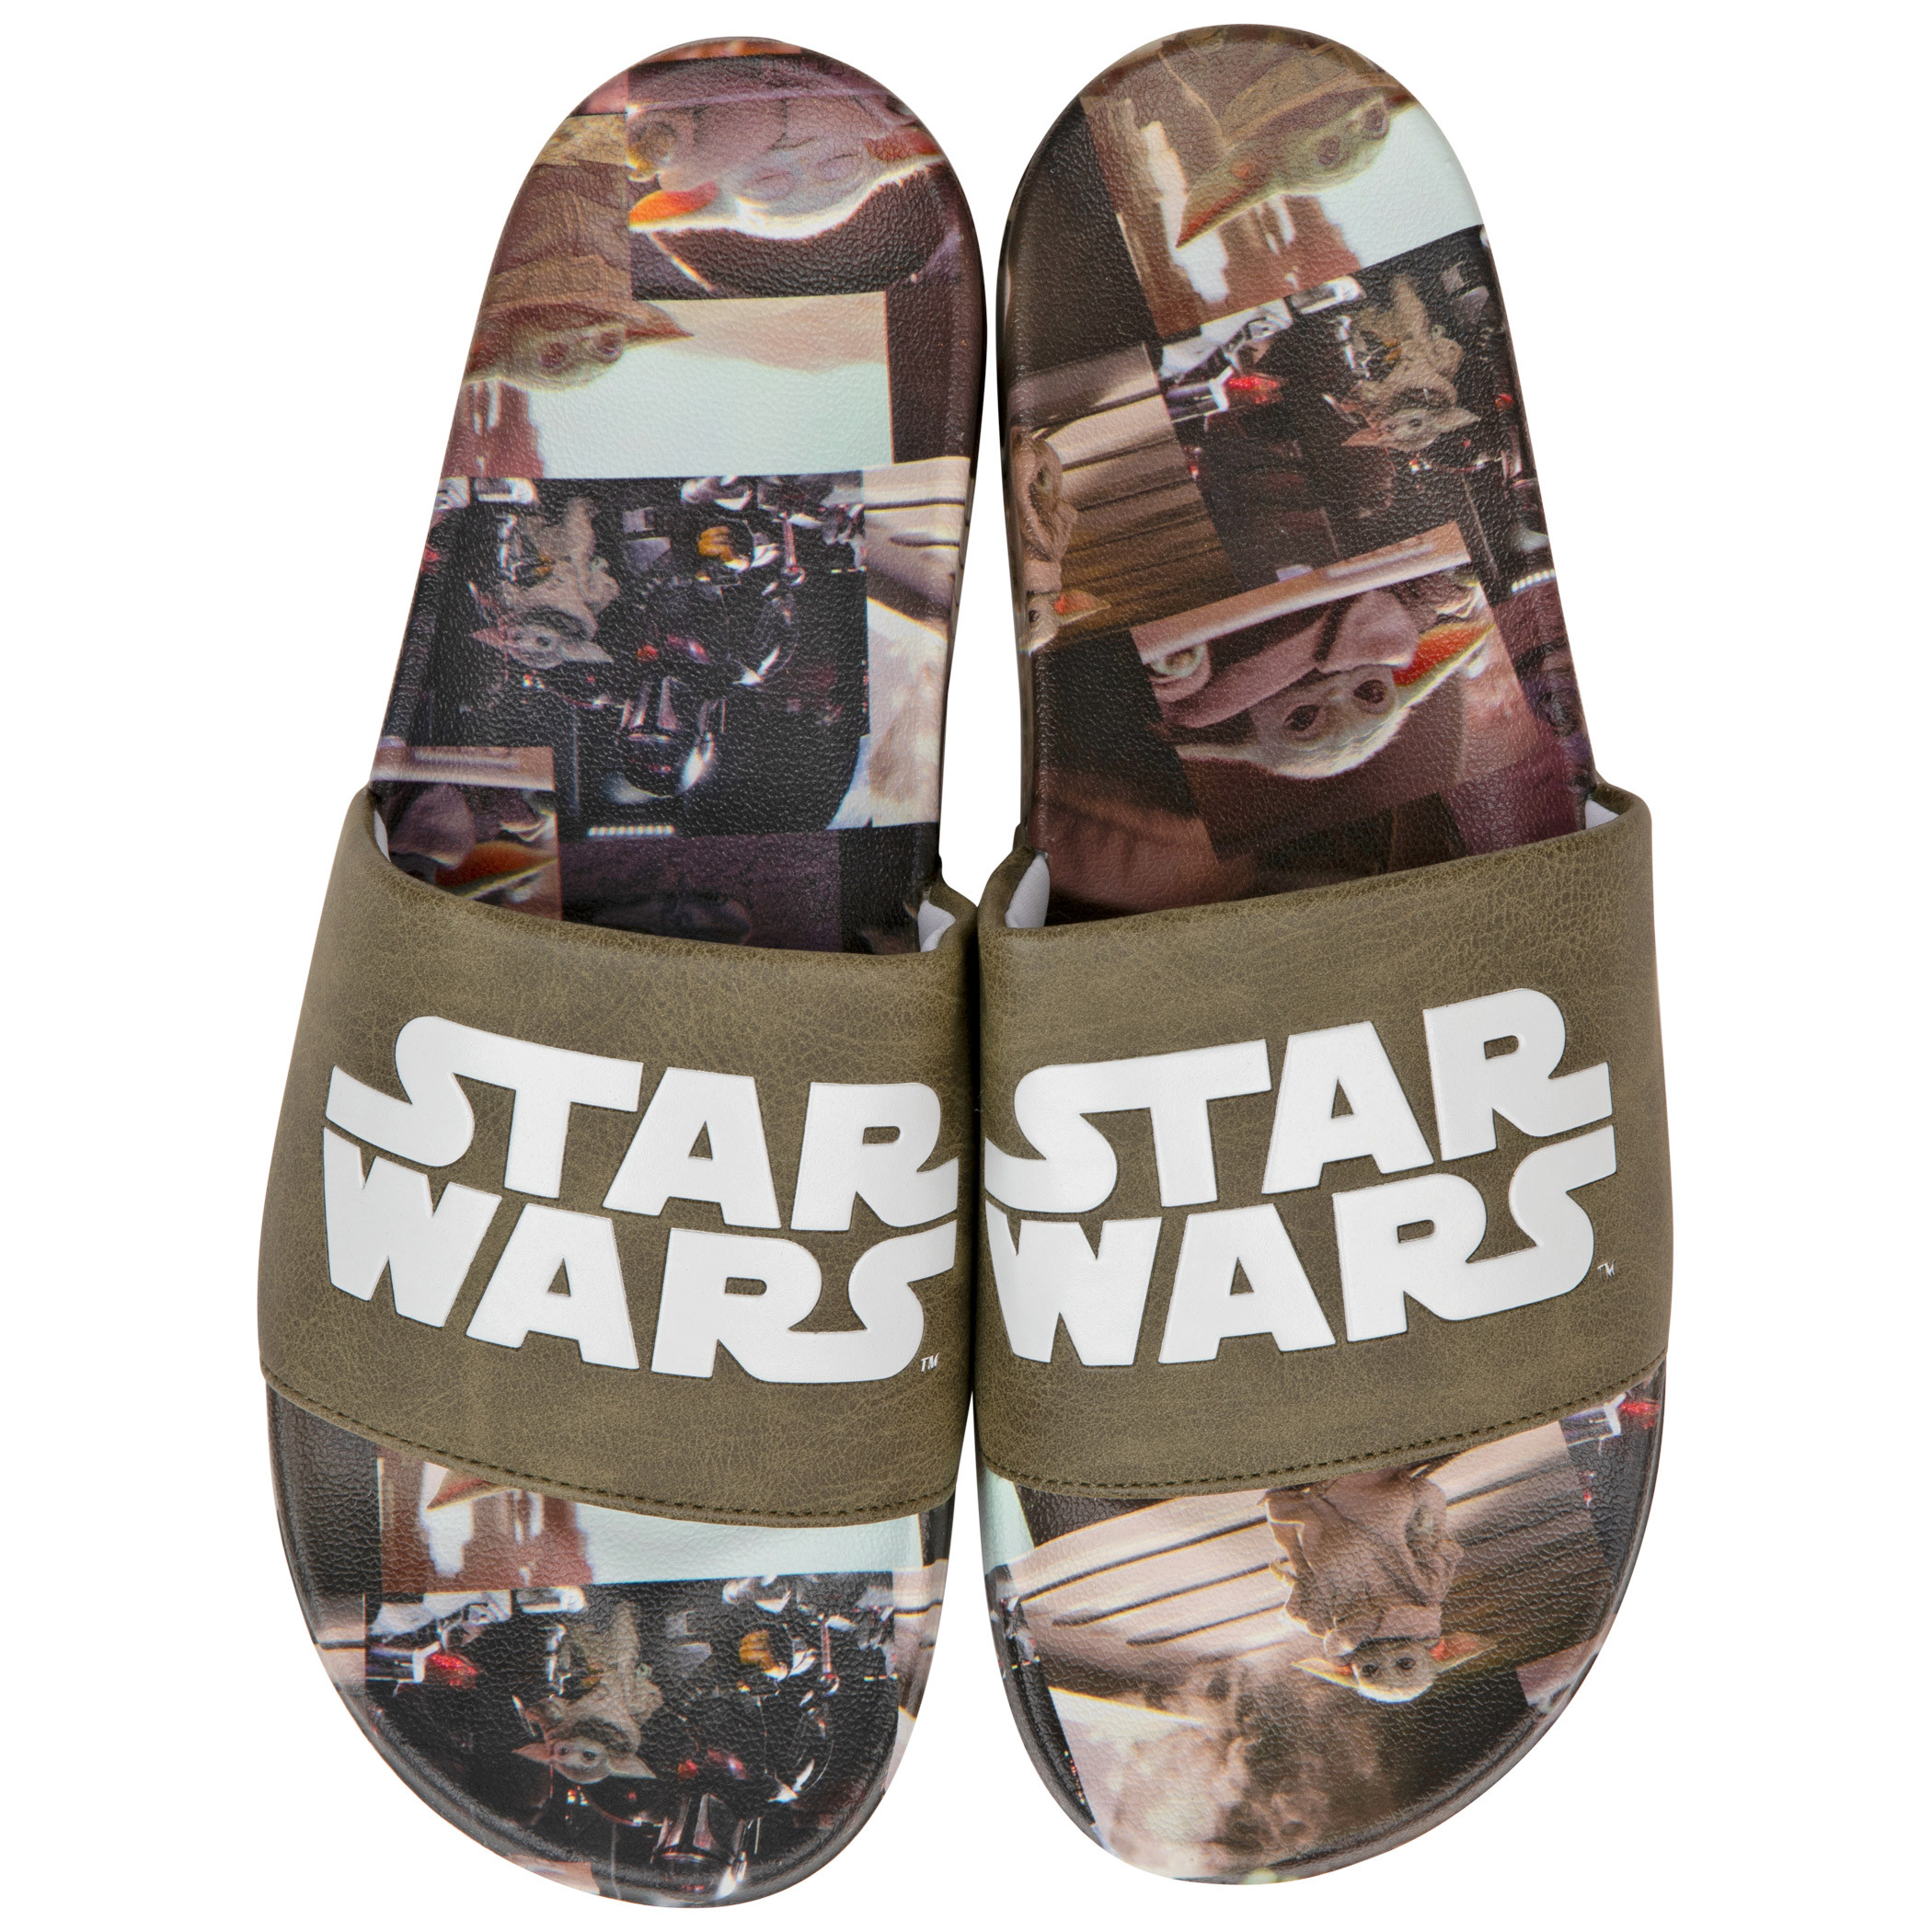 Star Wars Logo with The Child from the Mandalorian Scenes Sandal Slides